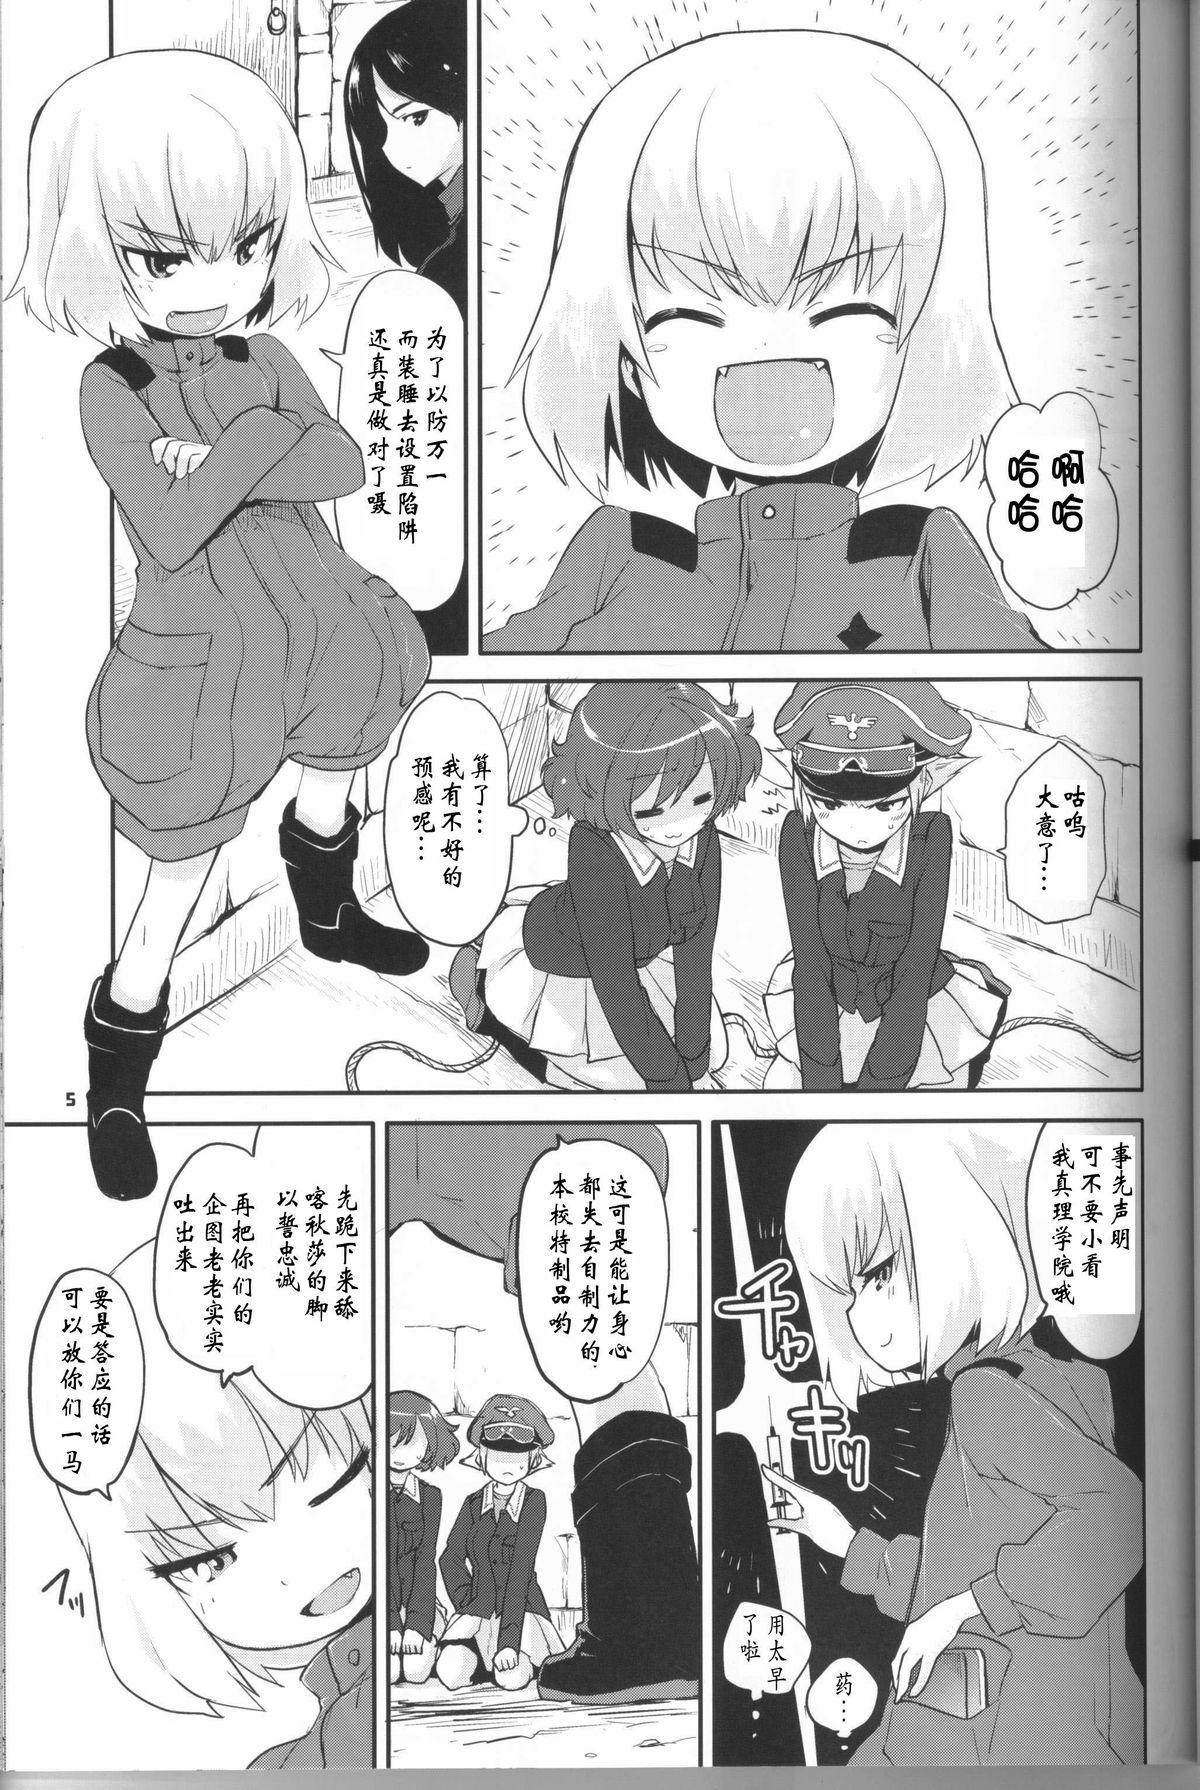 Jerking The General Frost Has Come! - Girls und panzer Teenage Girl Porn - Page 4